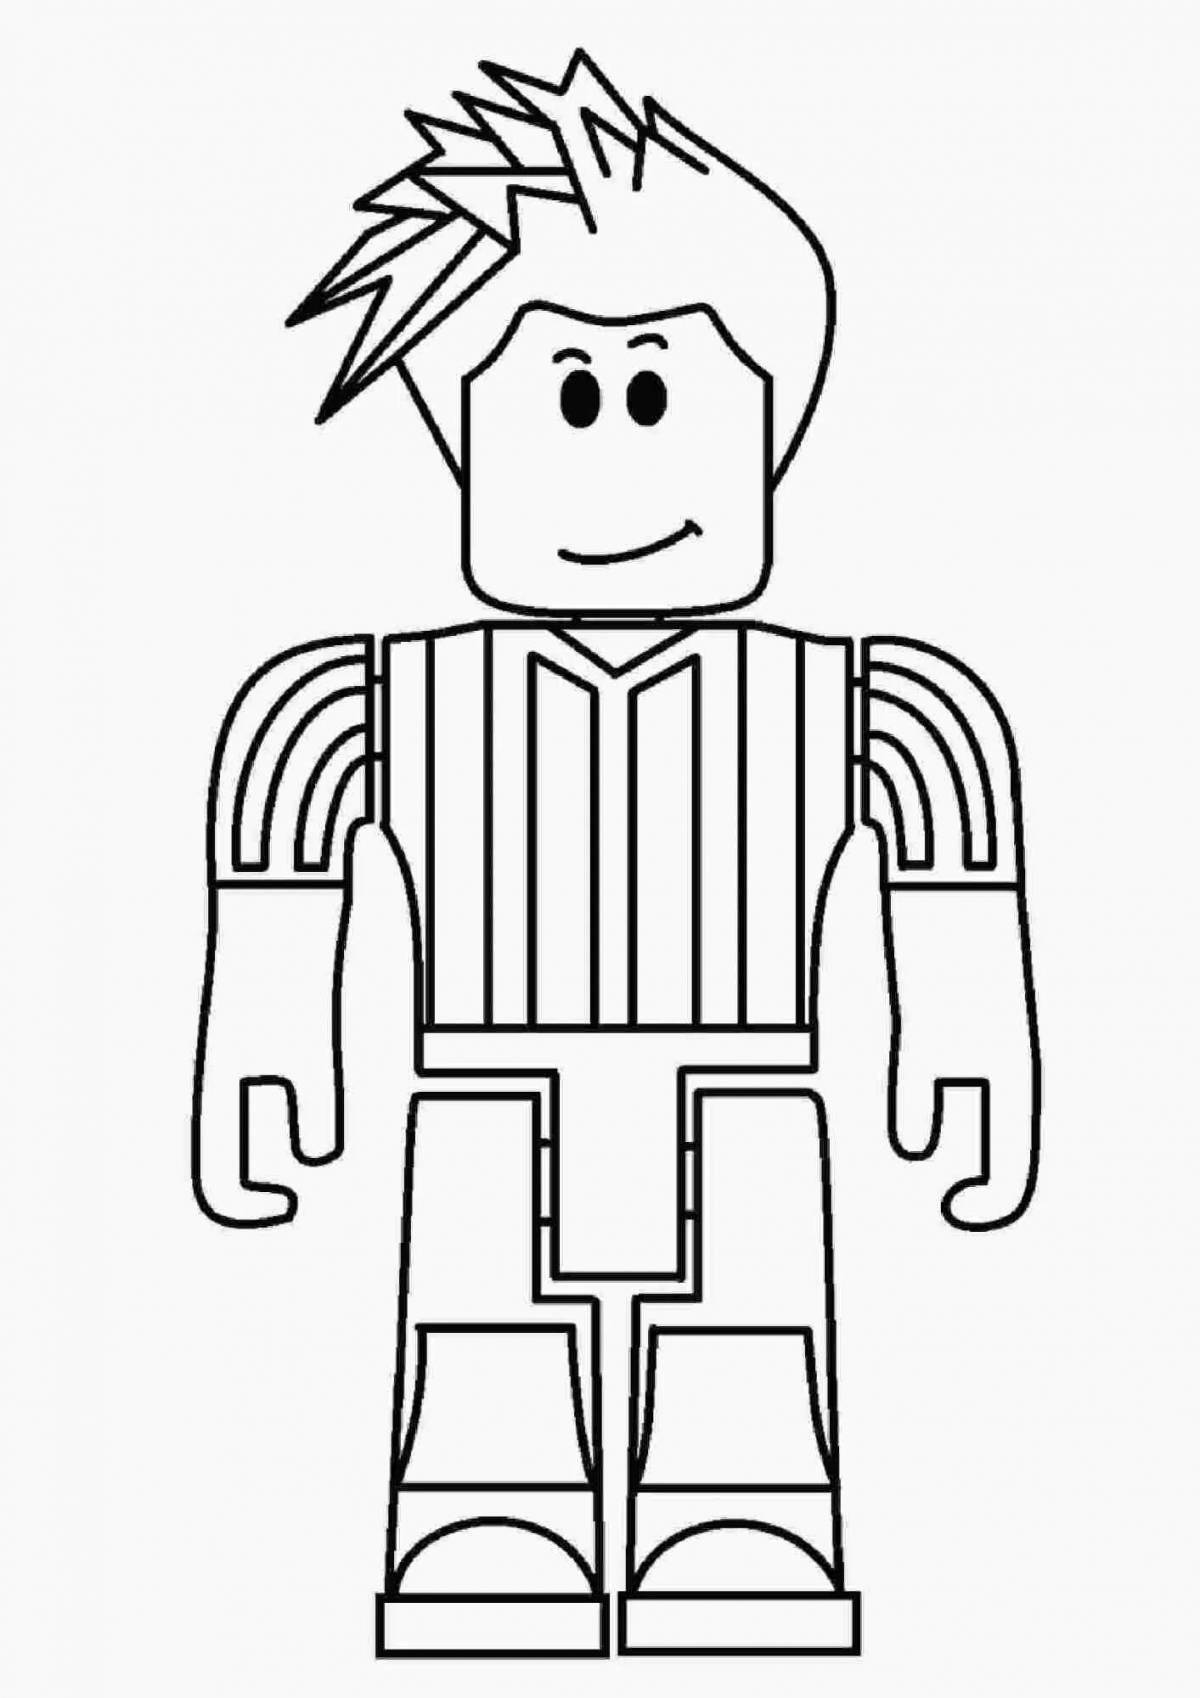 Roblox by numbers playful coloring page